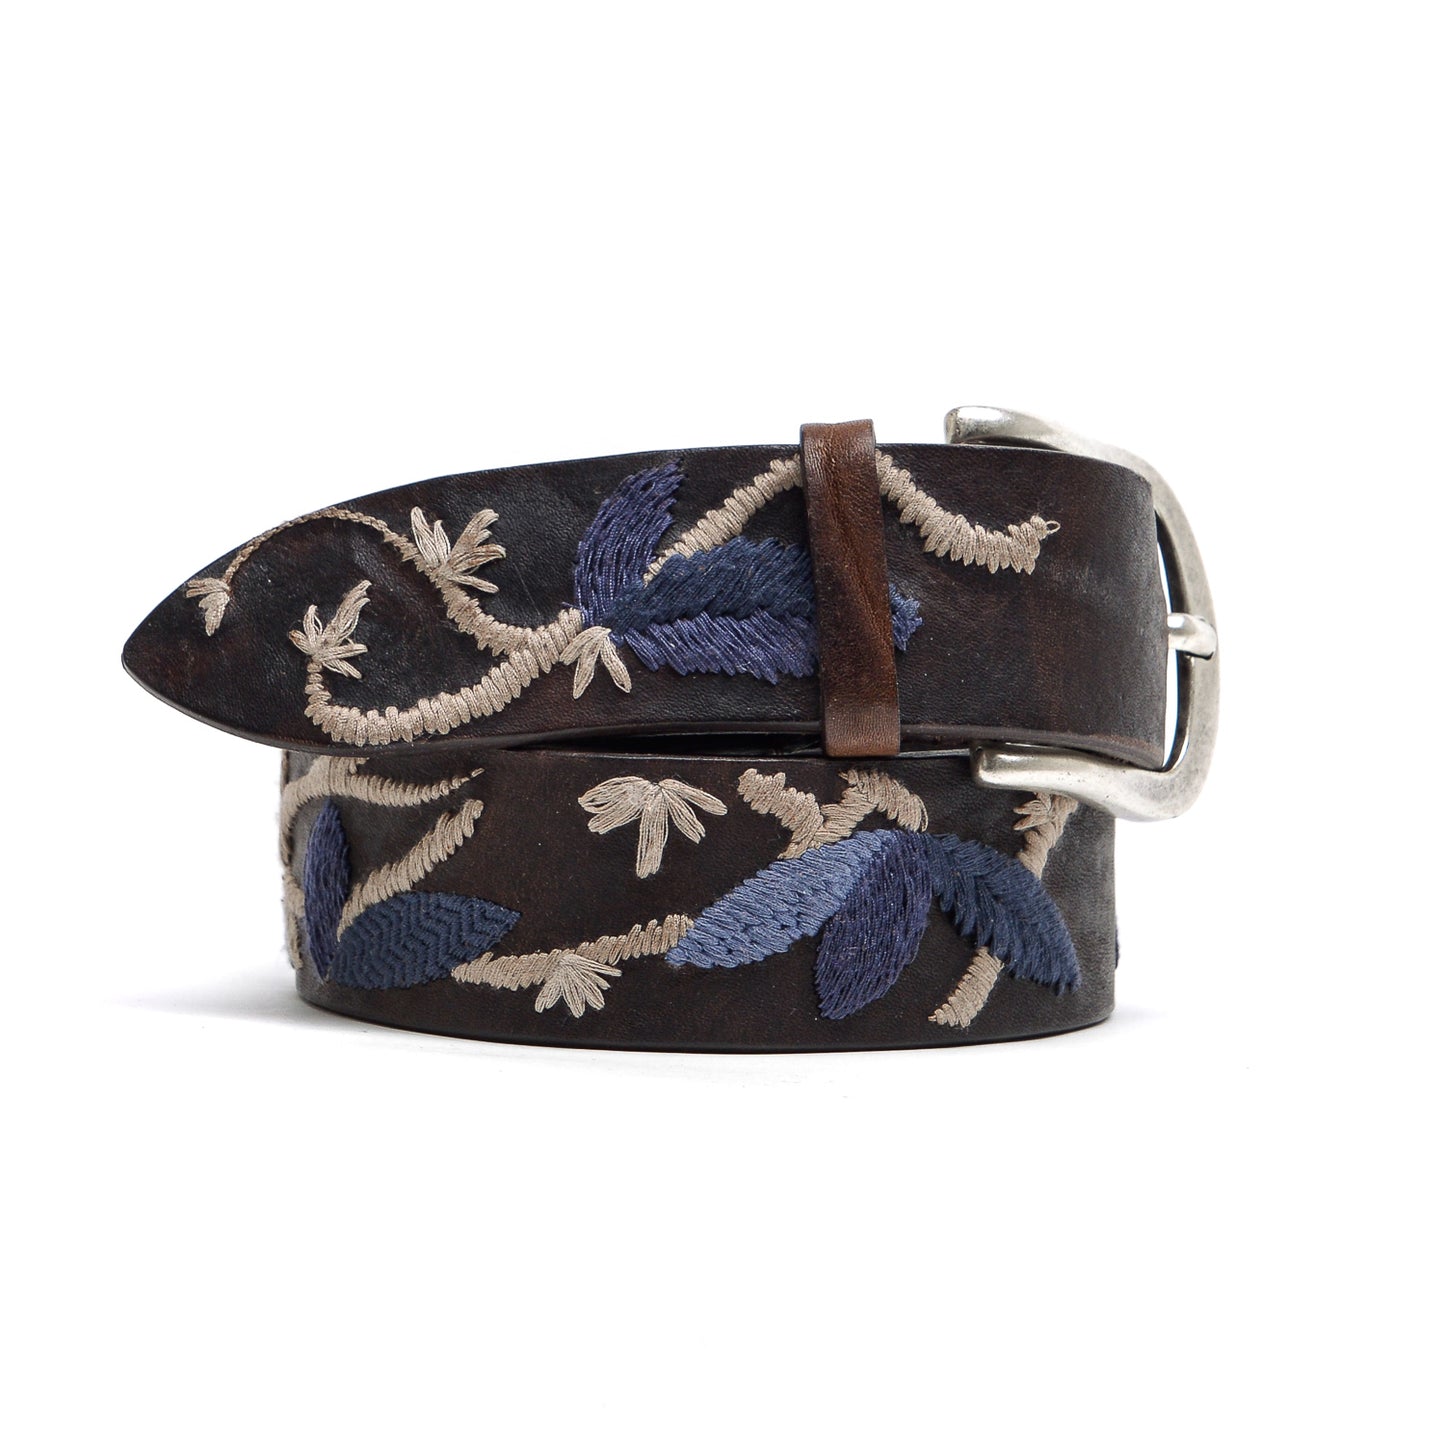 Embroidered Soft Leather Belt